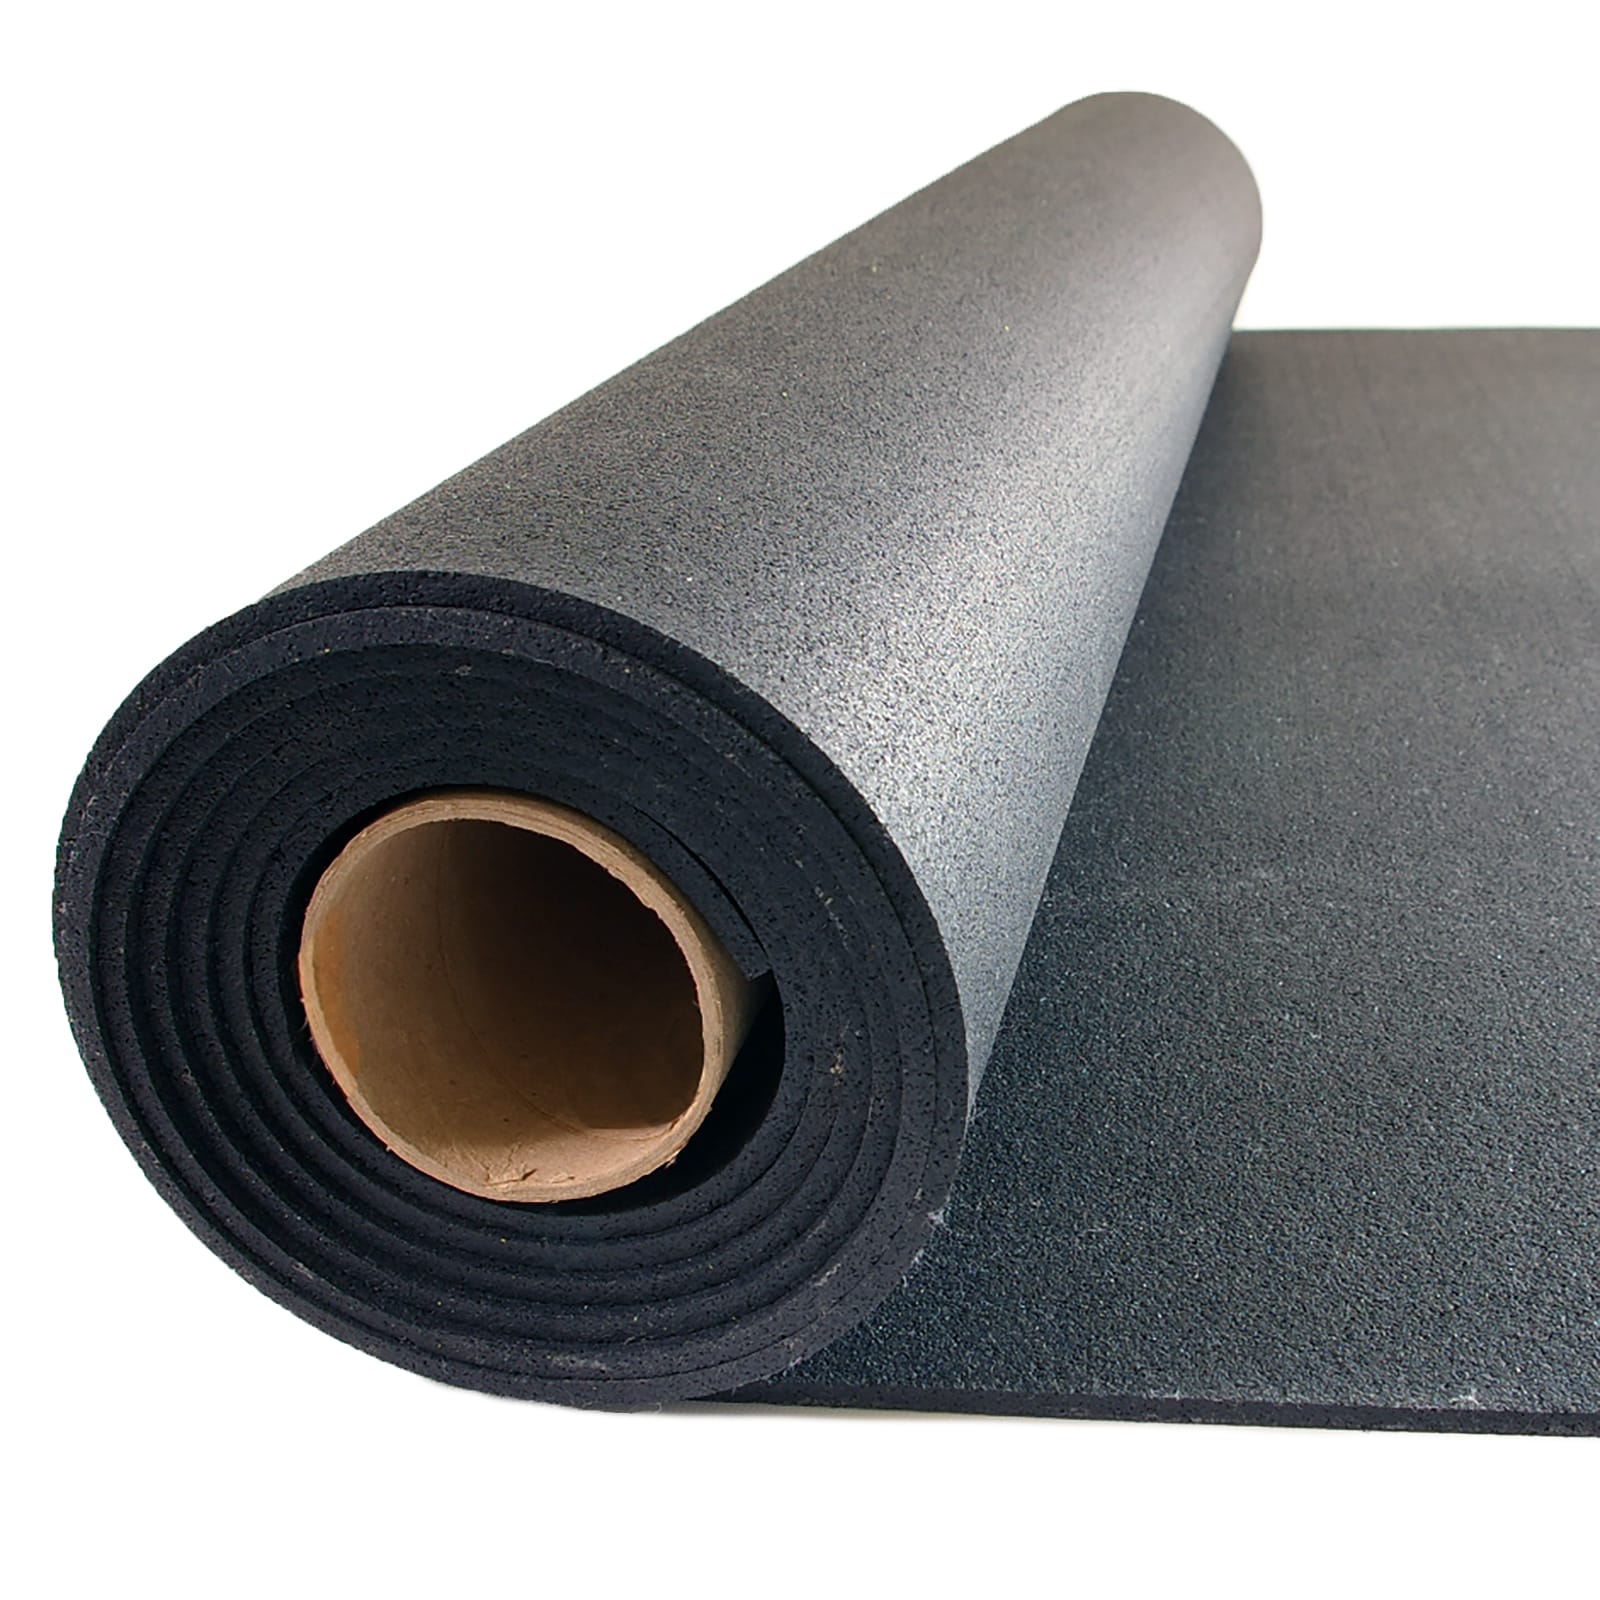 Greatmats 48-in W x 120-in L x 0.25-in T Rubber Gym Floor Sheet (40-sq ft)  at